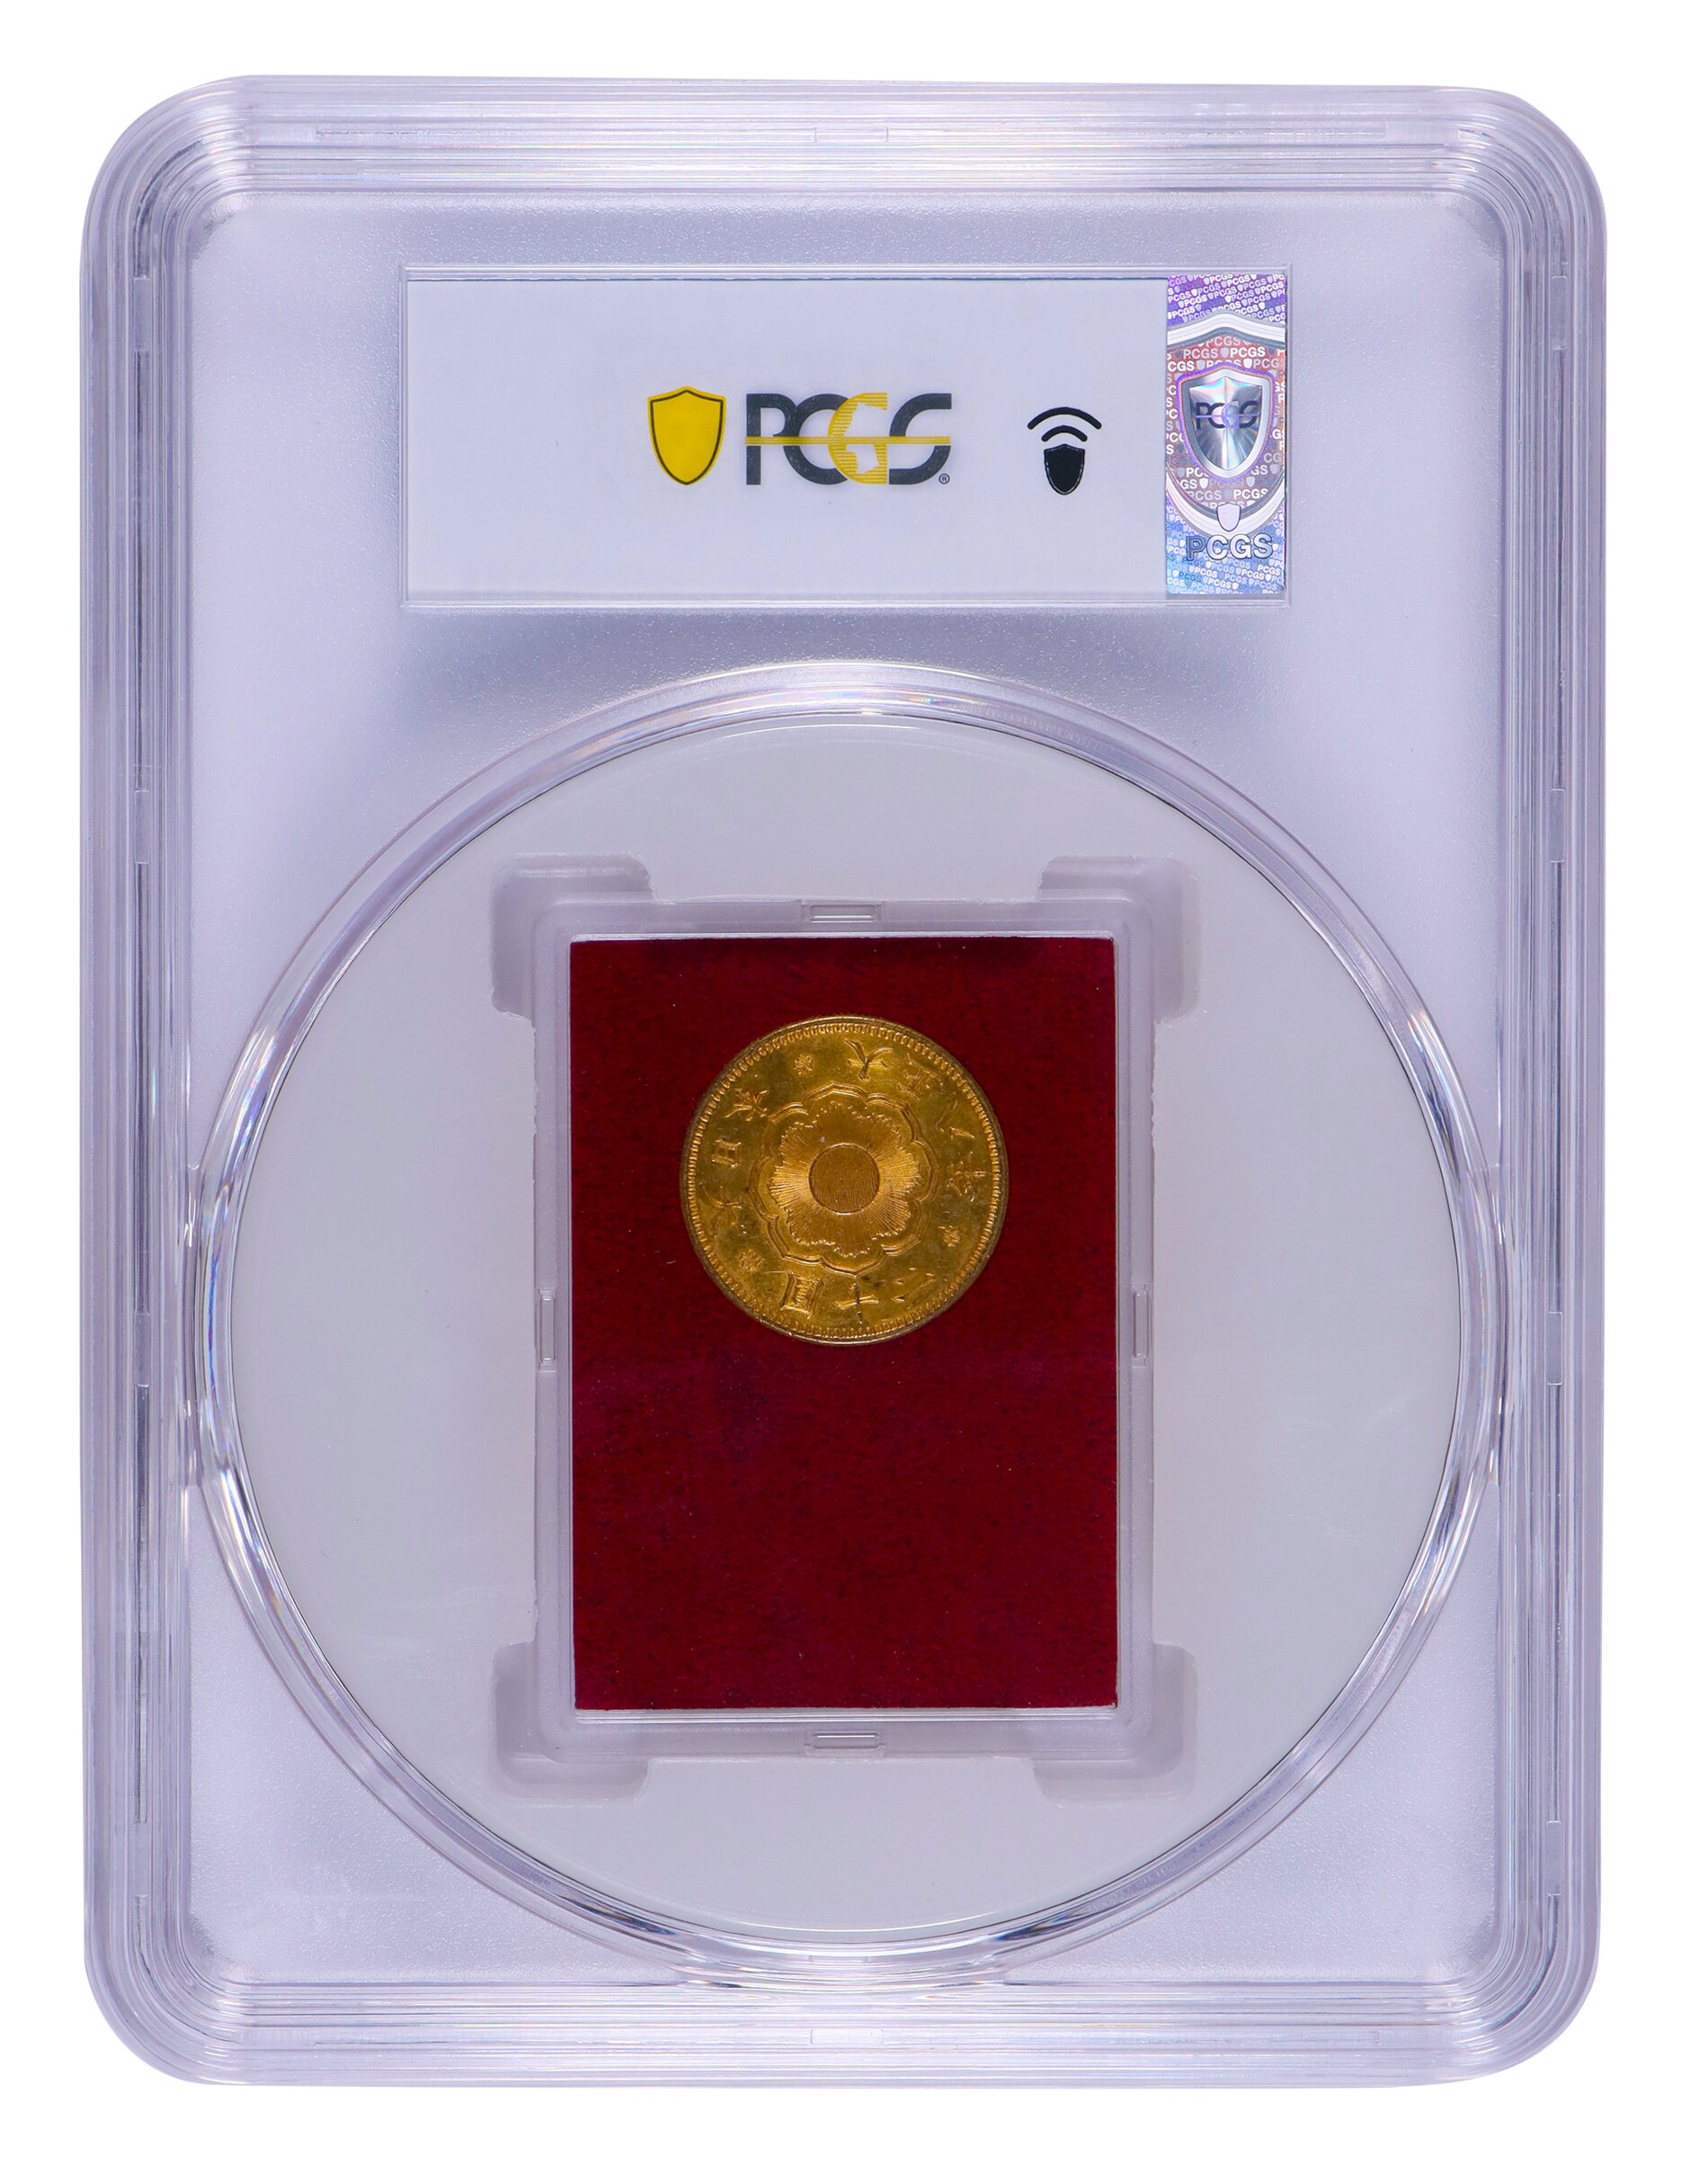 PCGS Now Encapsulating Japan Ministry of Finance Holder Coins